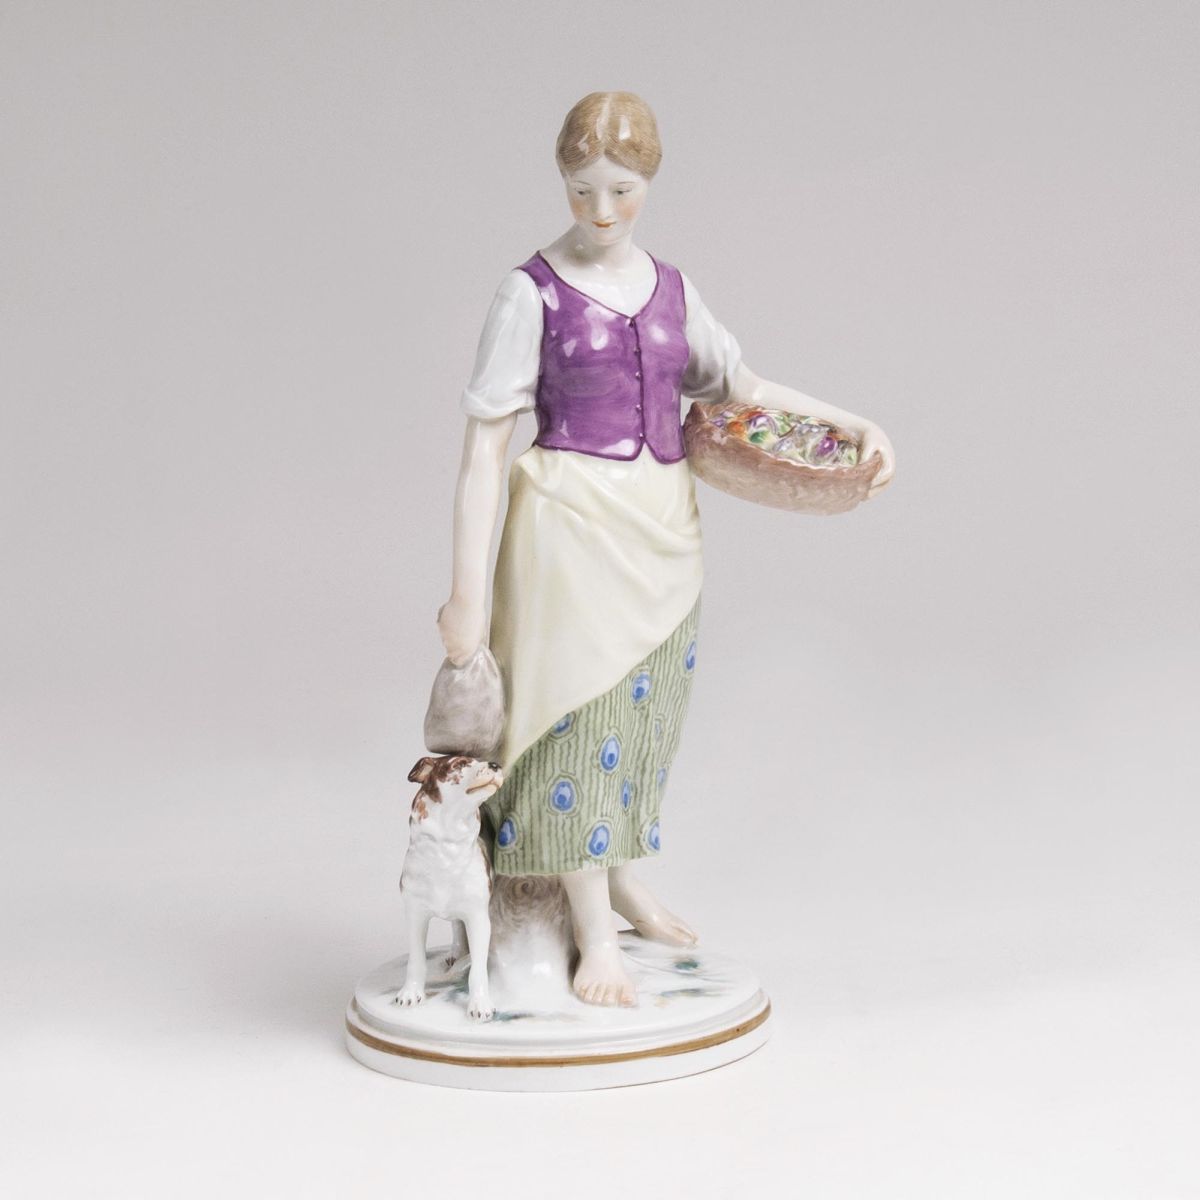 An Art Nouveau Figure 'Country Girl with Pointer'